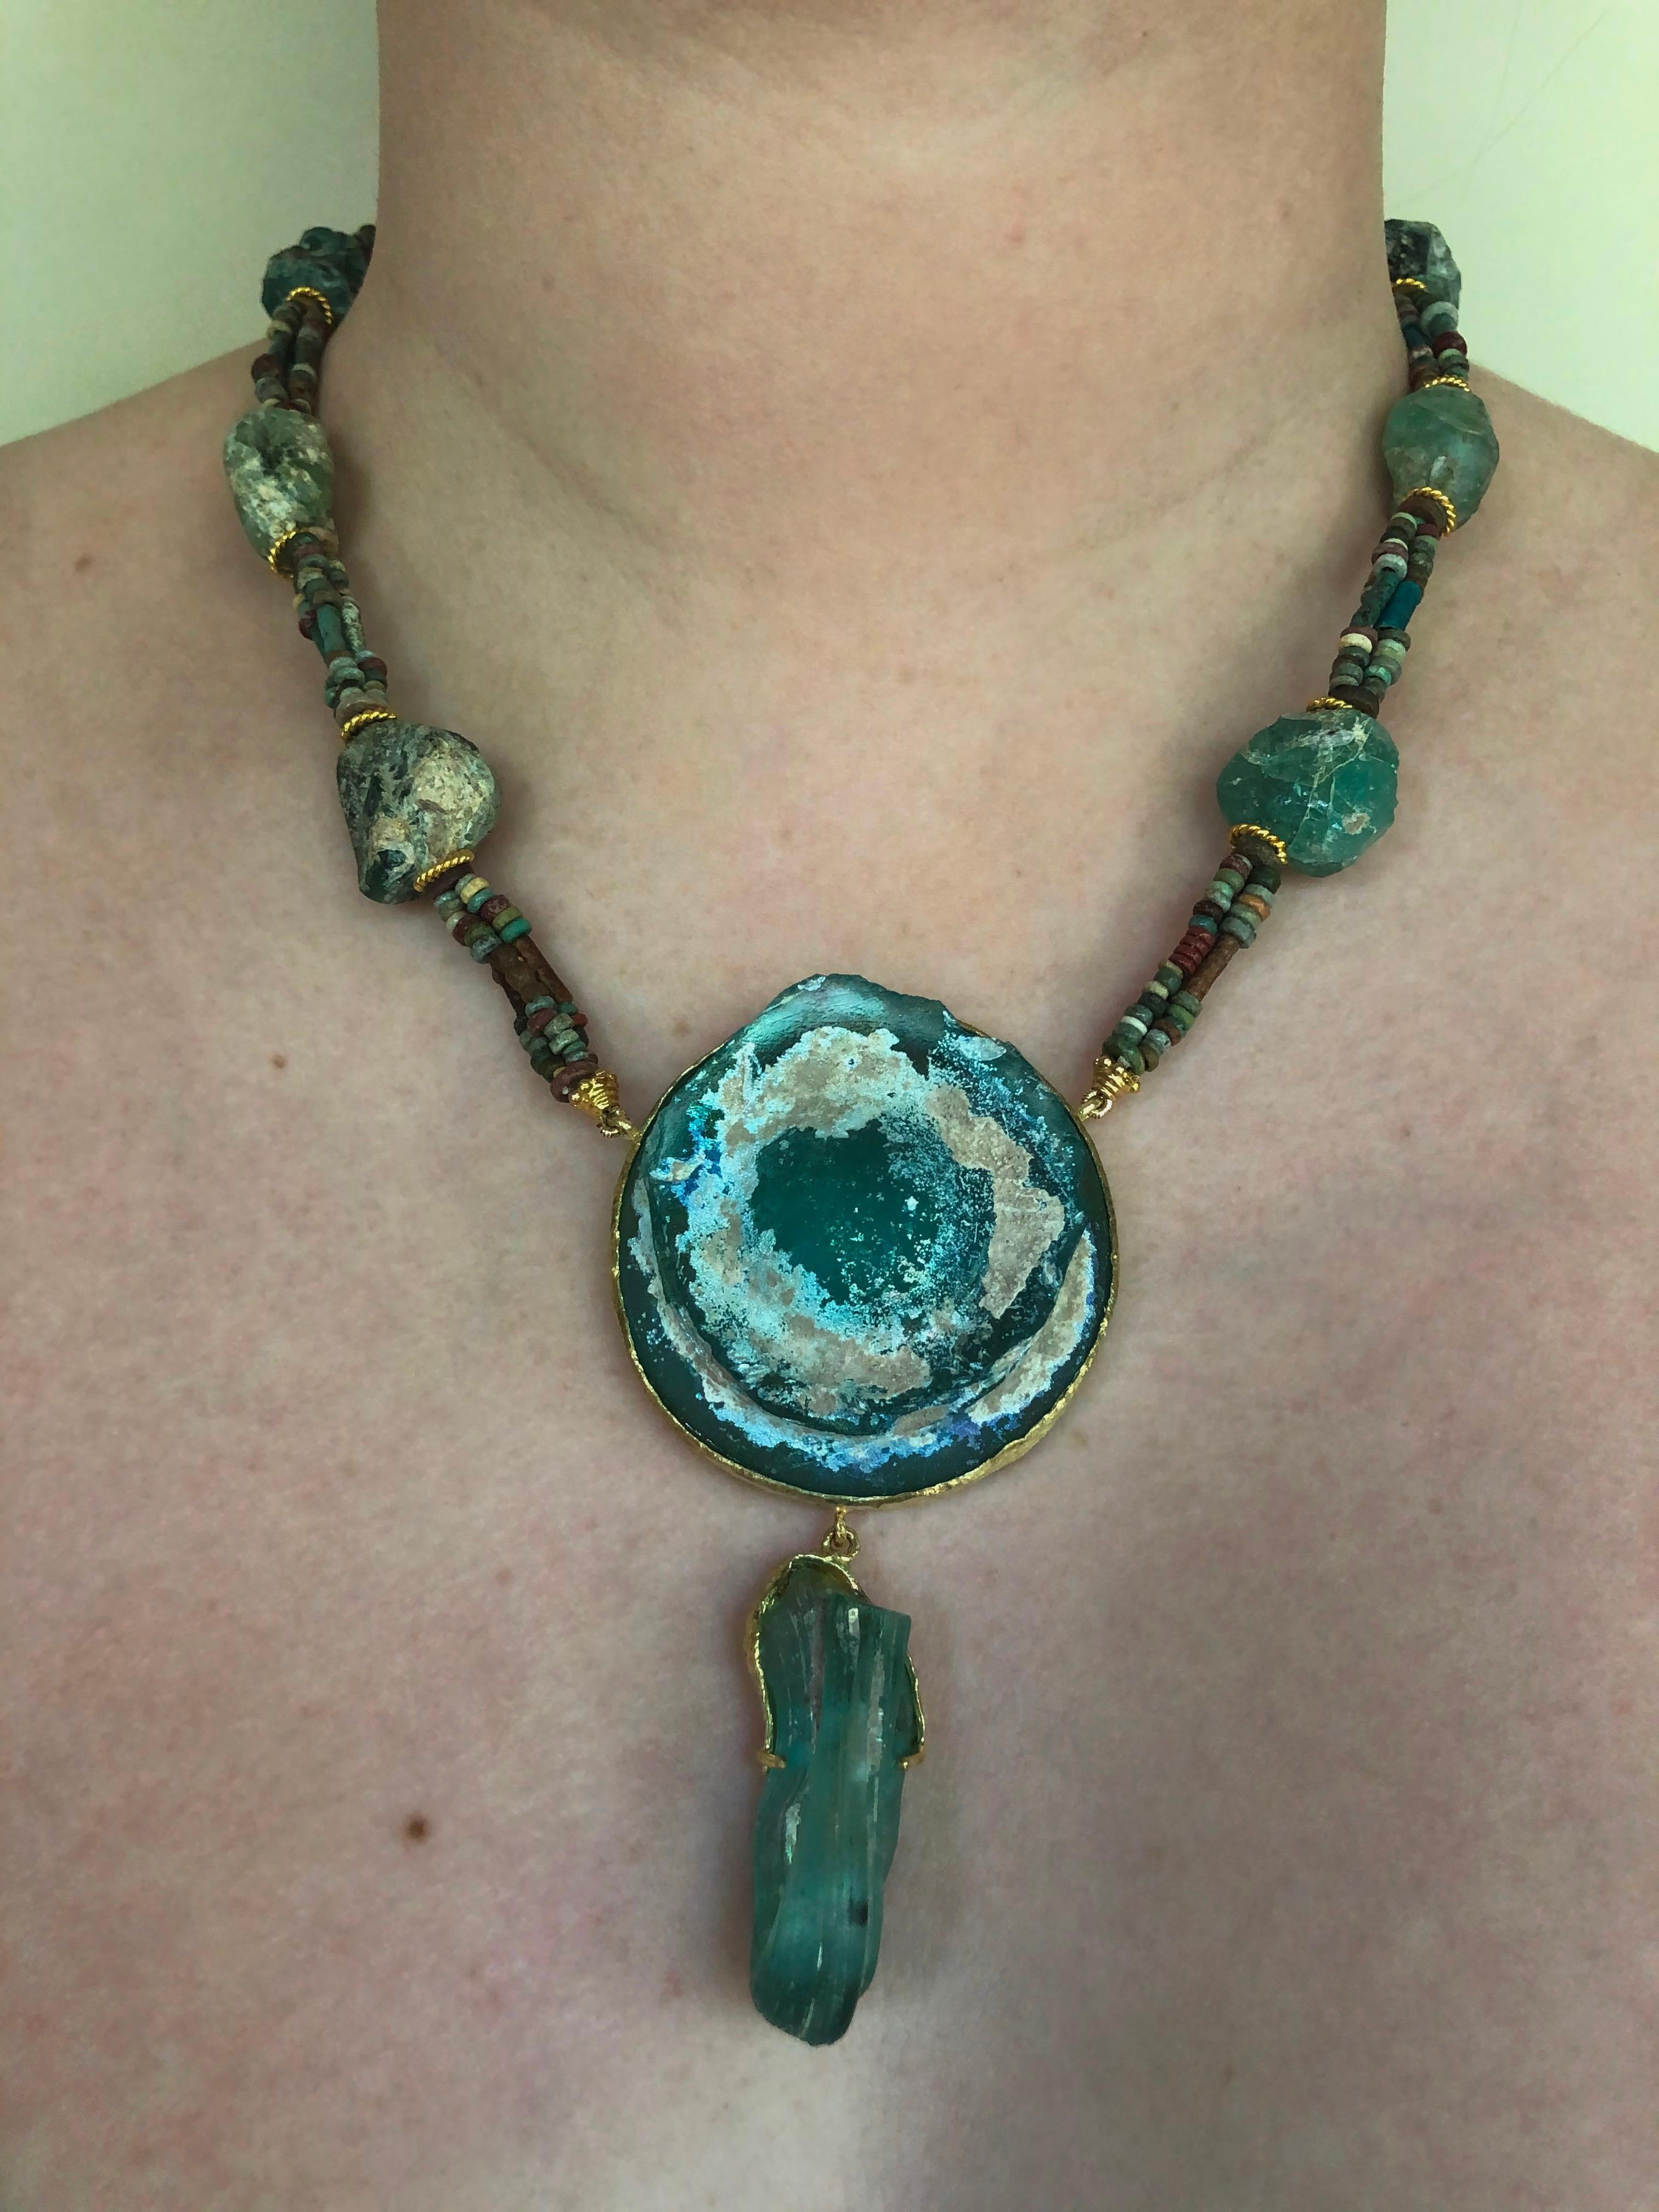 This Marina J. original necklace is made with authentic Ancient Roman glass beads, 18k yellow gold, and Egyptian Hyksos faience ceramic beads dating from 1800 BC. The larger glass beads and centerpieces are made of Ancient Roman blue-green glass,